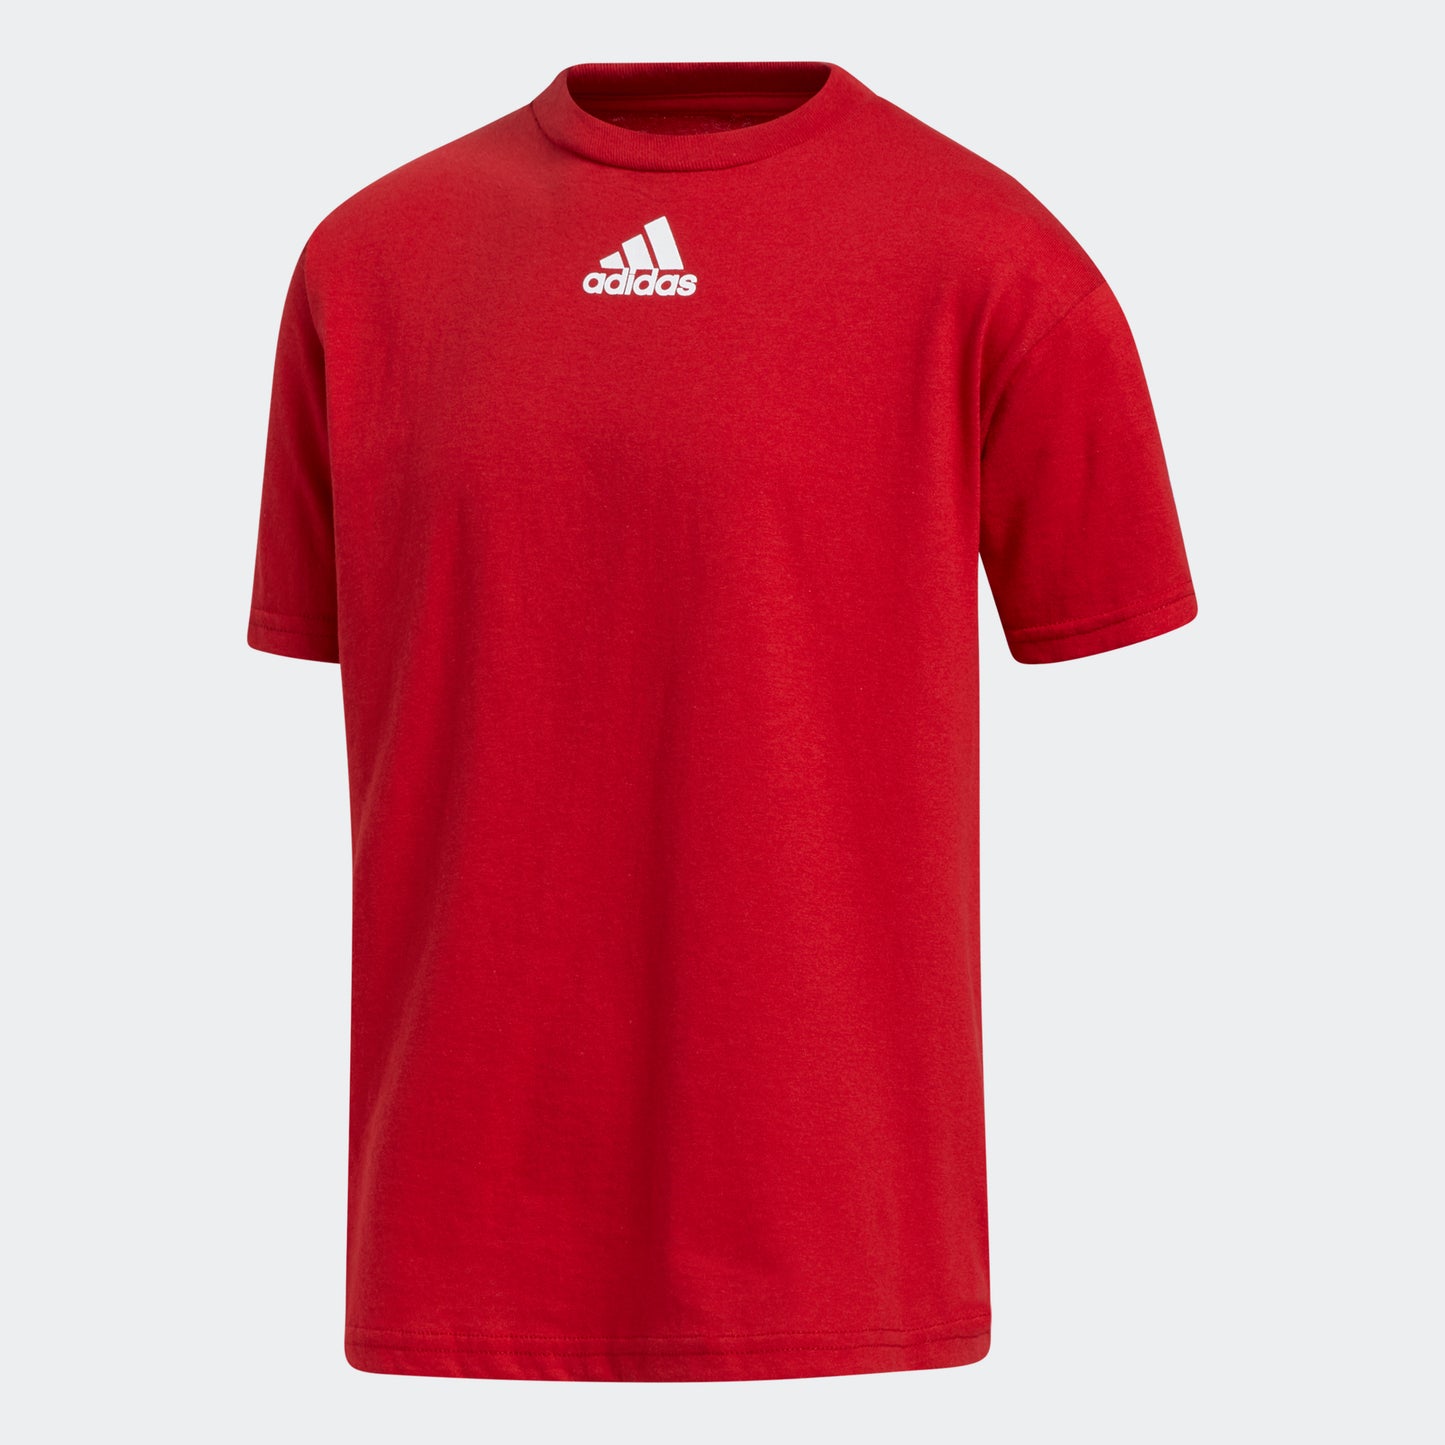 adidas AMPLIFIER T-Shirt | Power Red | Youth